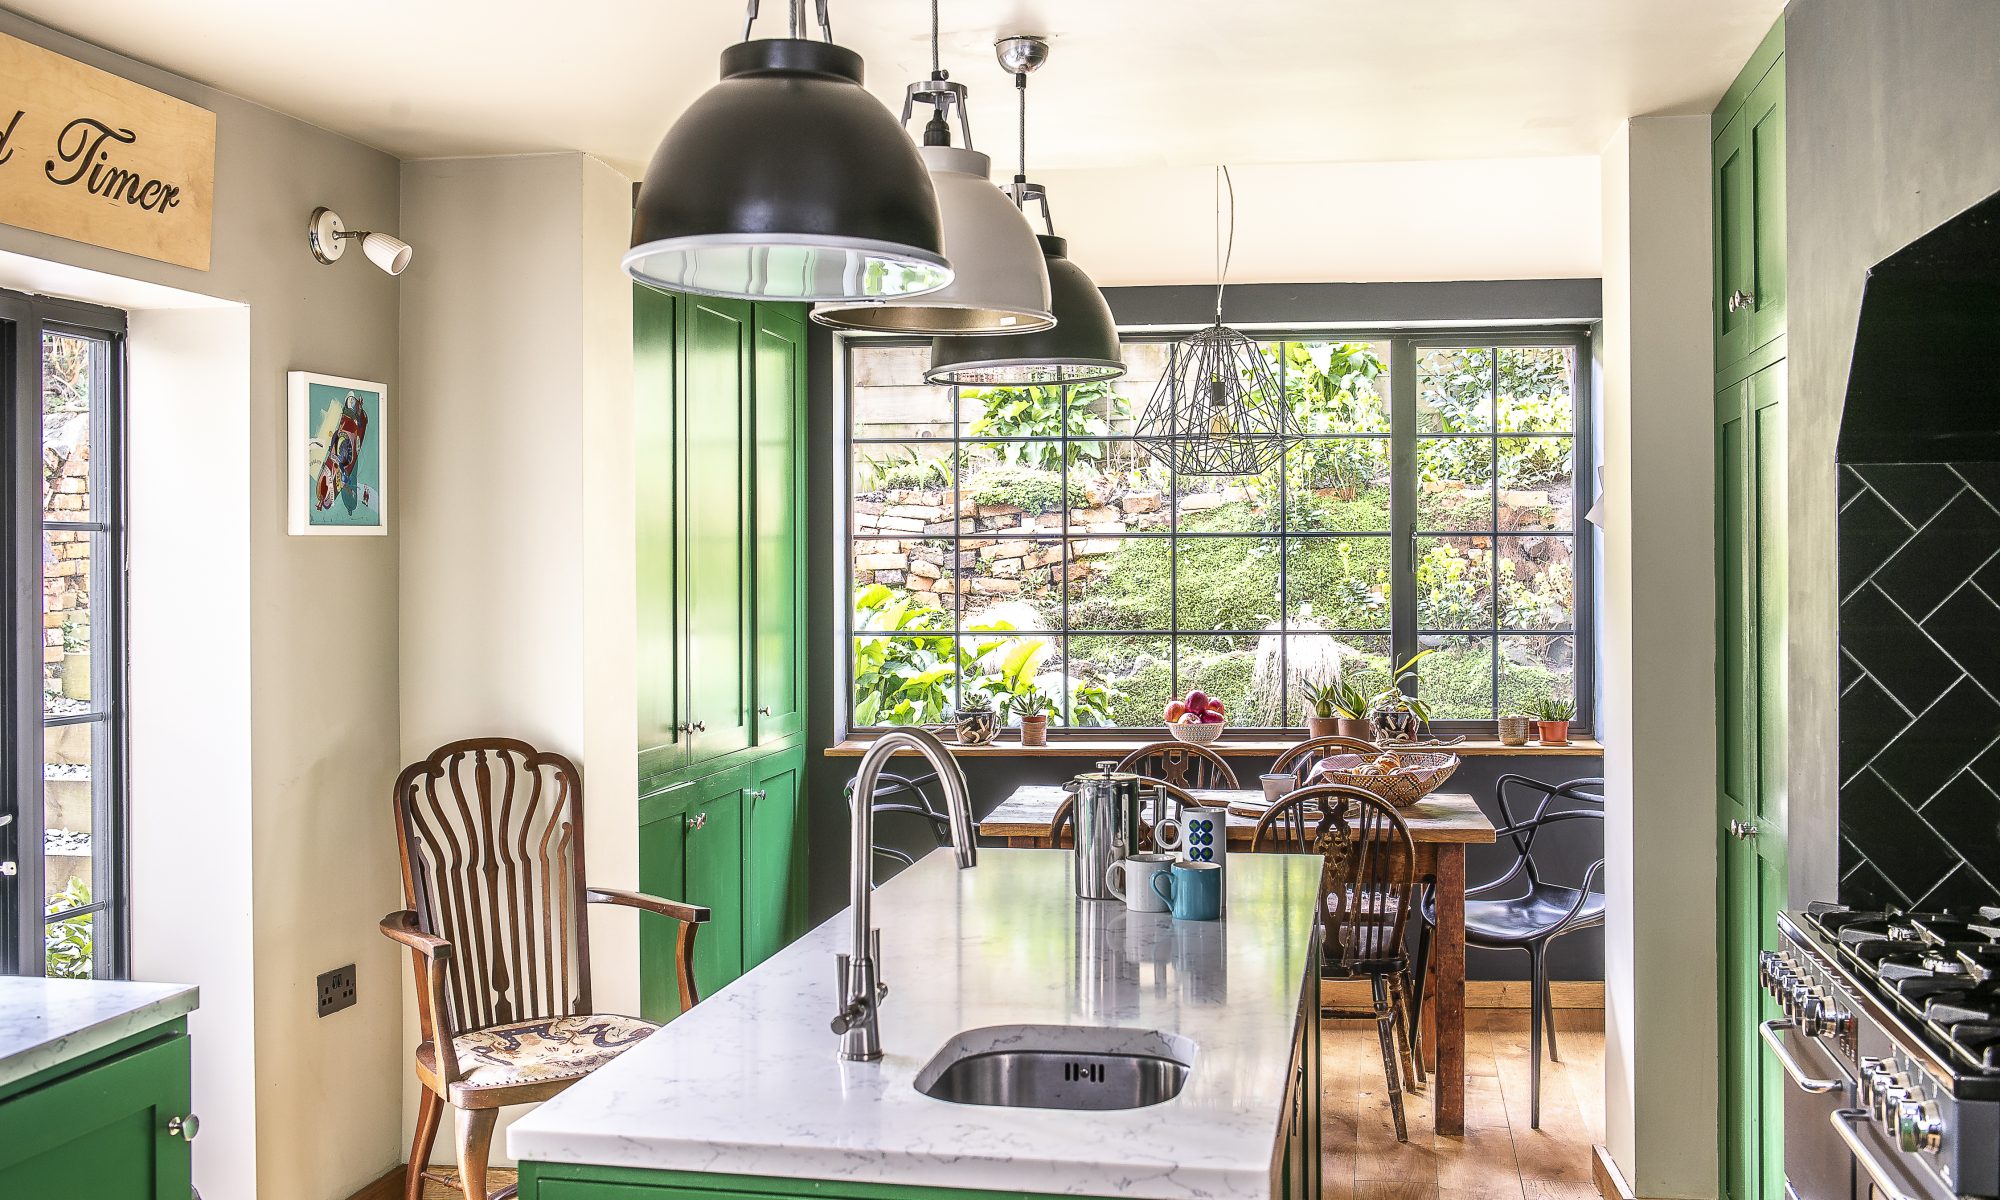 The cabinet work and cupboards in the kitchen have all been painted in a bright grass green, Sadie’s favourite colour, with black accent walls around the range cooker and the picture window